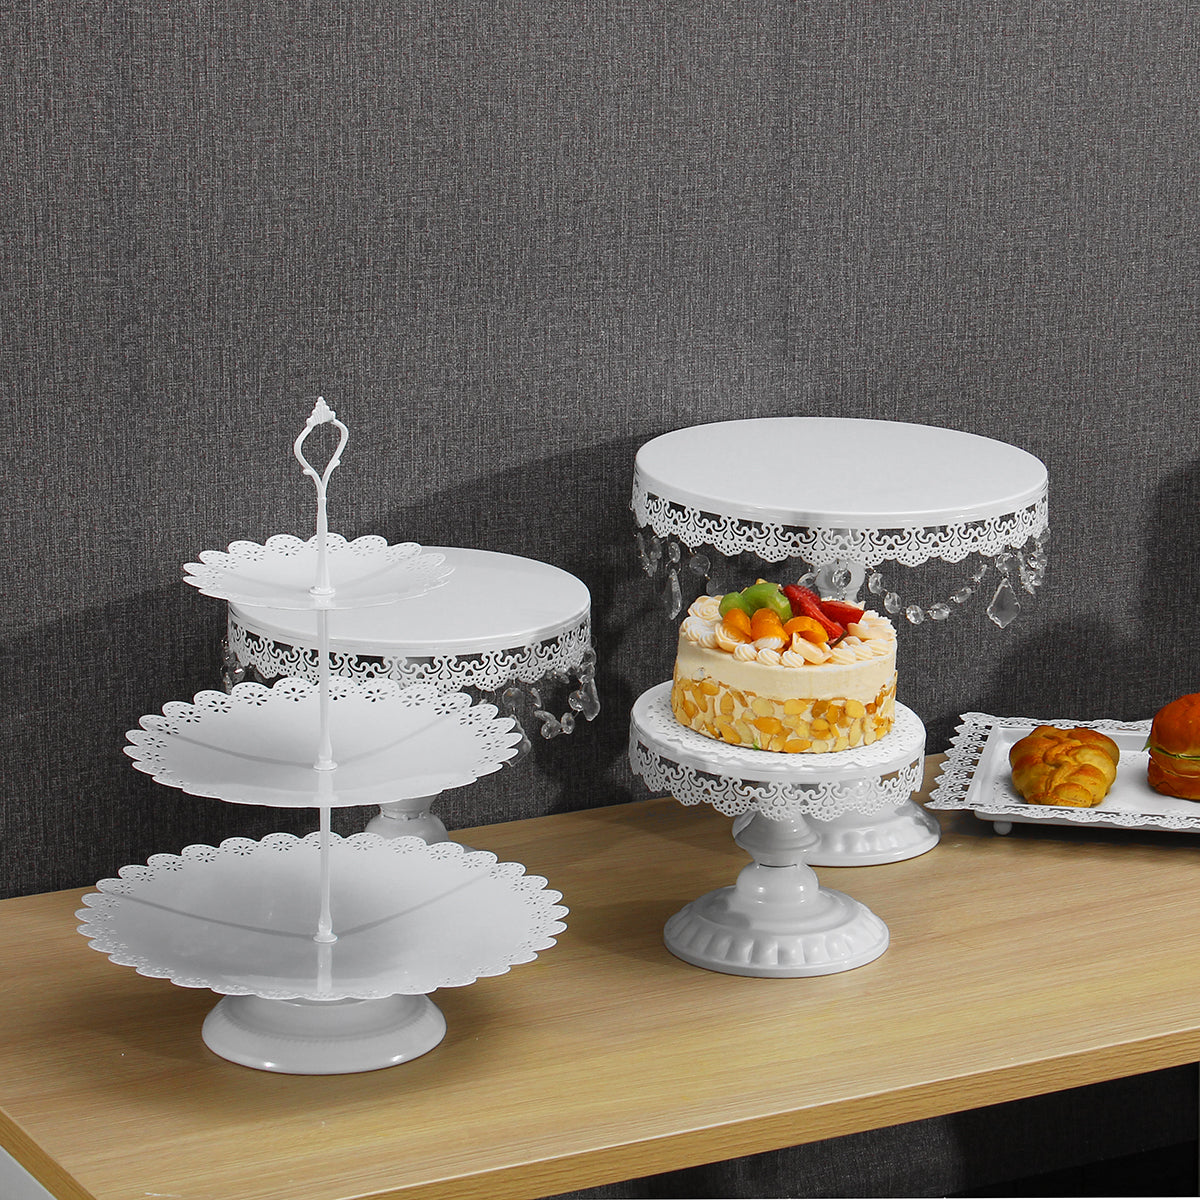 5PCS Cake Stand Set for Wedding Decorations White Table Kit Decorating Party Suppliers for Fondant Dessert Metal Cupcake Stand